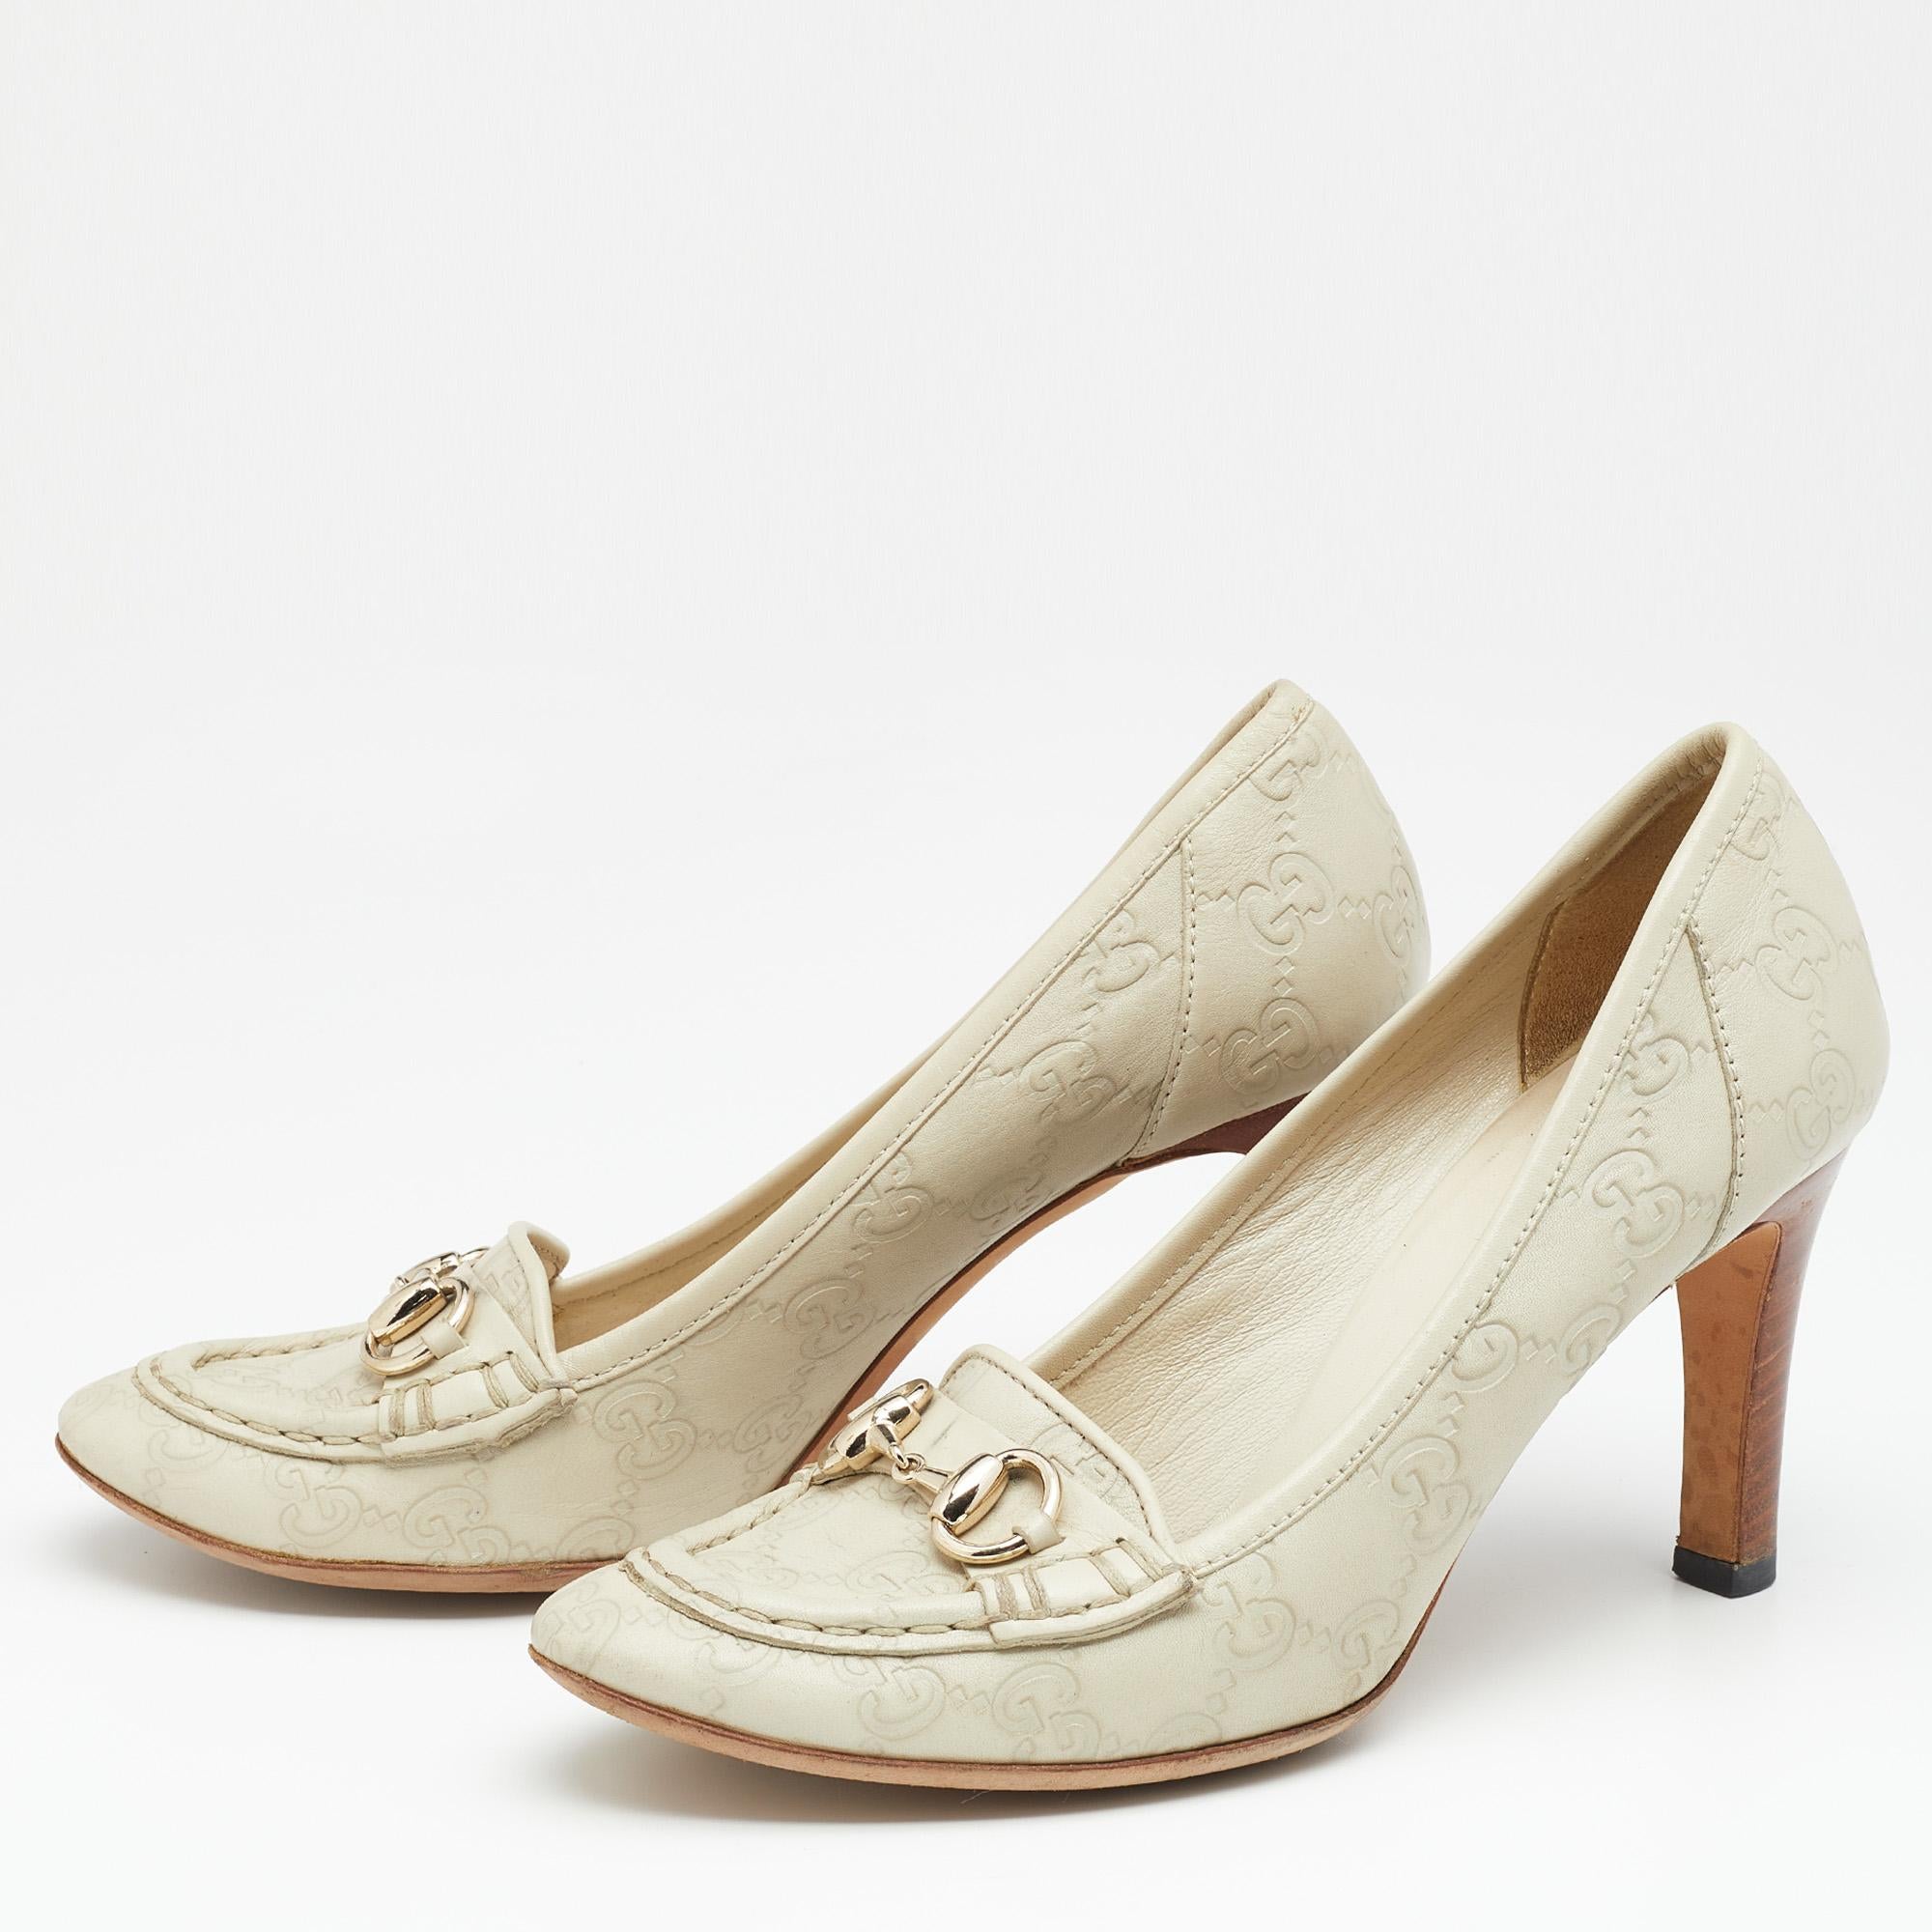 The fusion of two different styles lends this pair of Gucci pumps an elevated appeal. Constructed from Guccisima leather, the Horsebit motif on the front marks the tradition of the brand, and its wooden-like heels serve as a striking